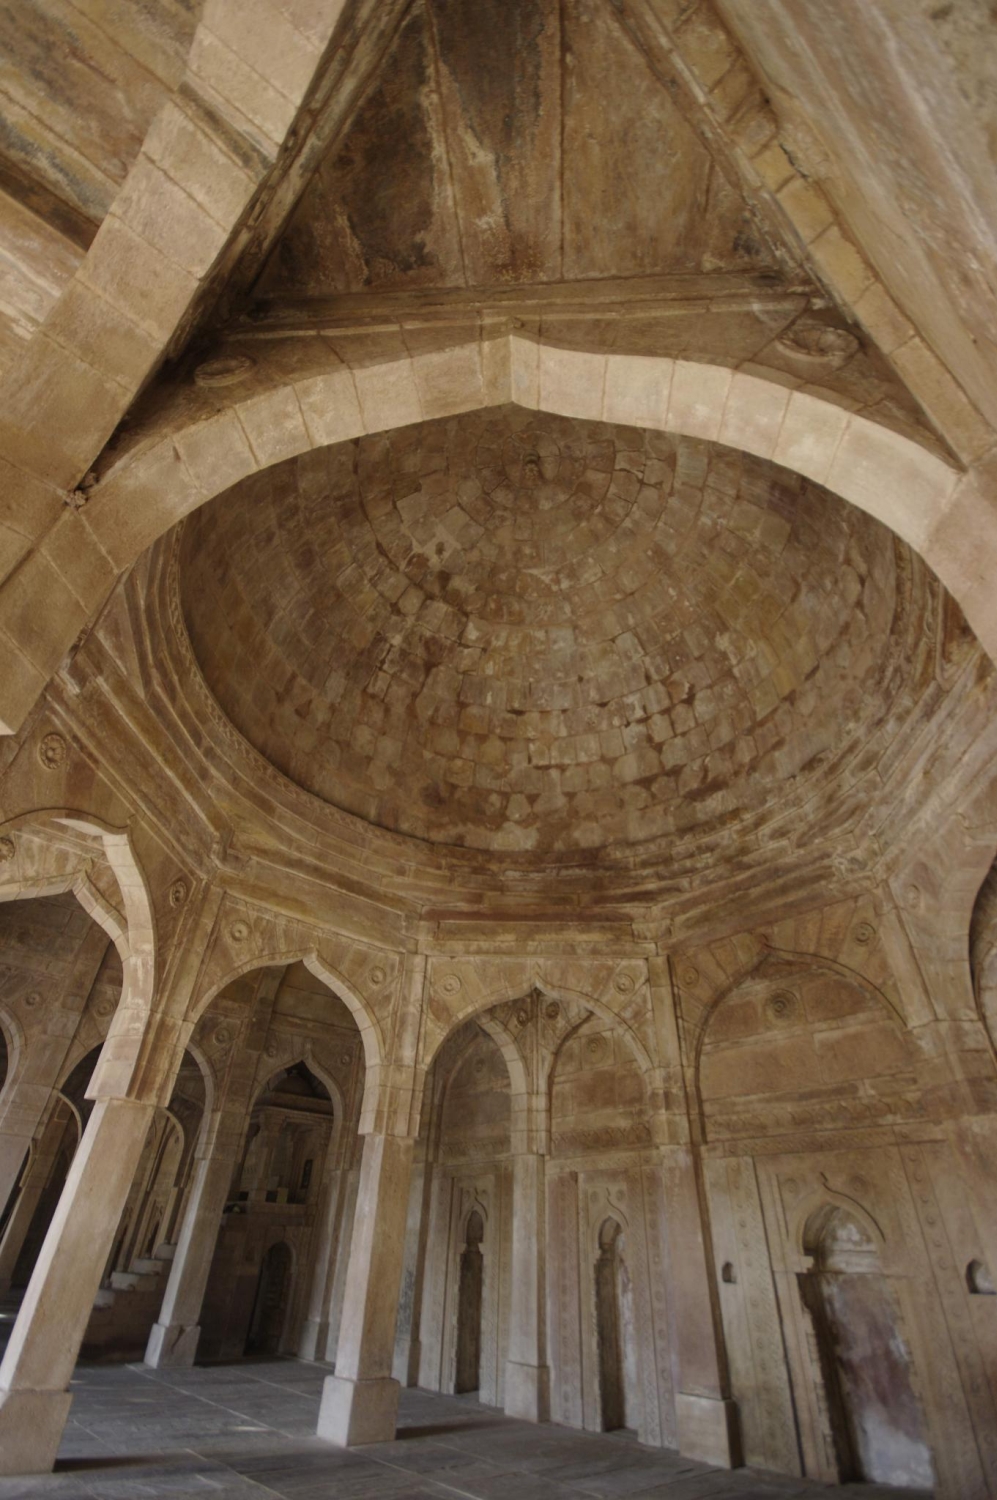 Interior view showing missing dome